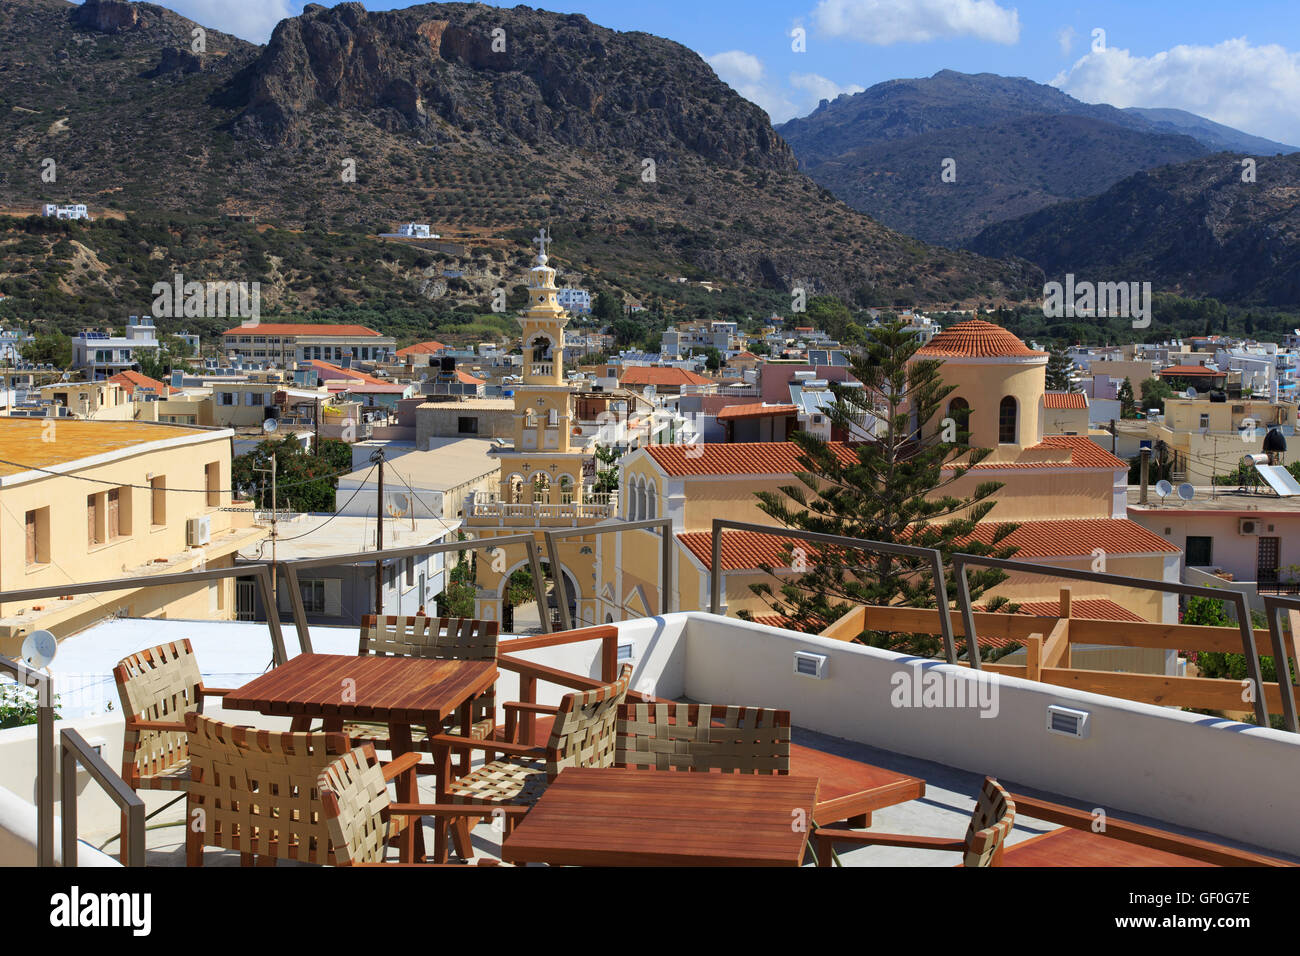 General View overlooking the town of Paleochora, Crete Stock Photo